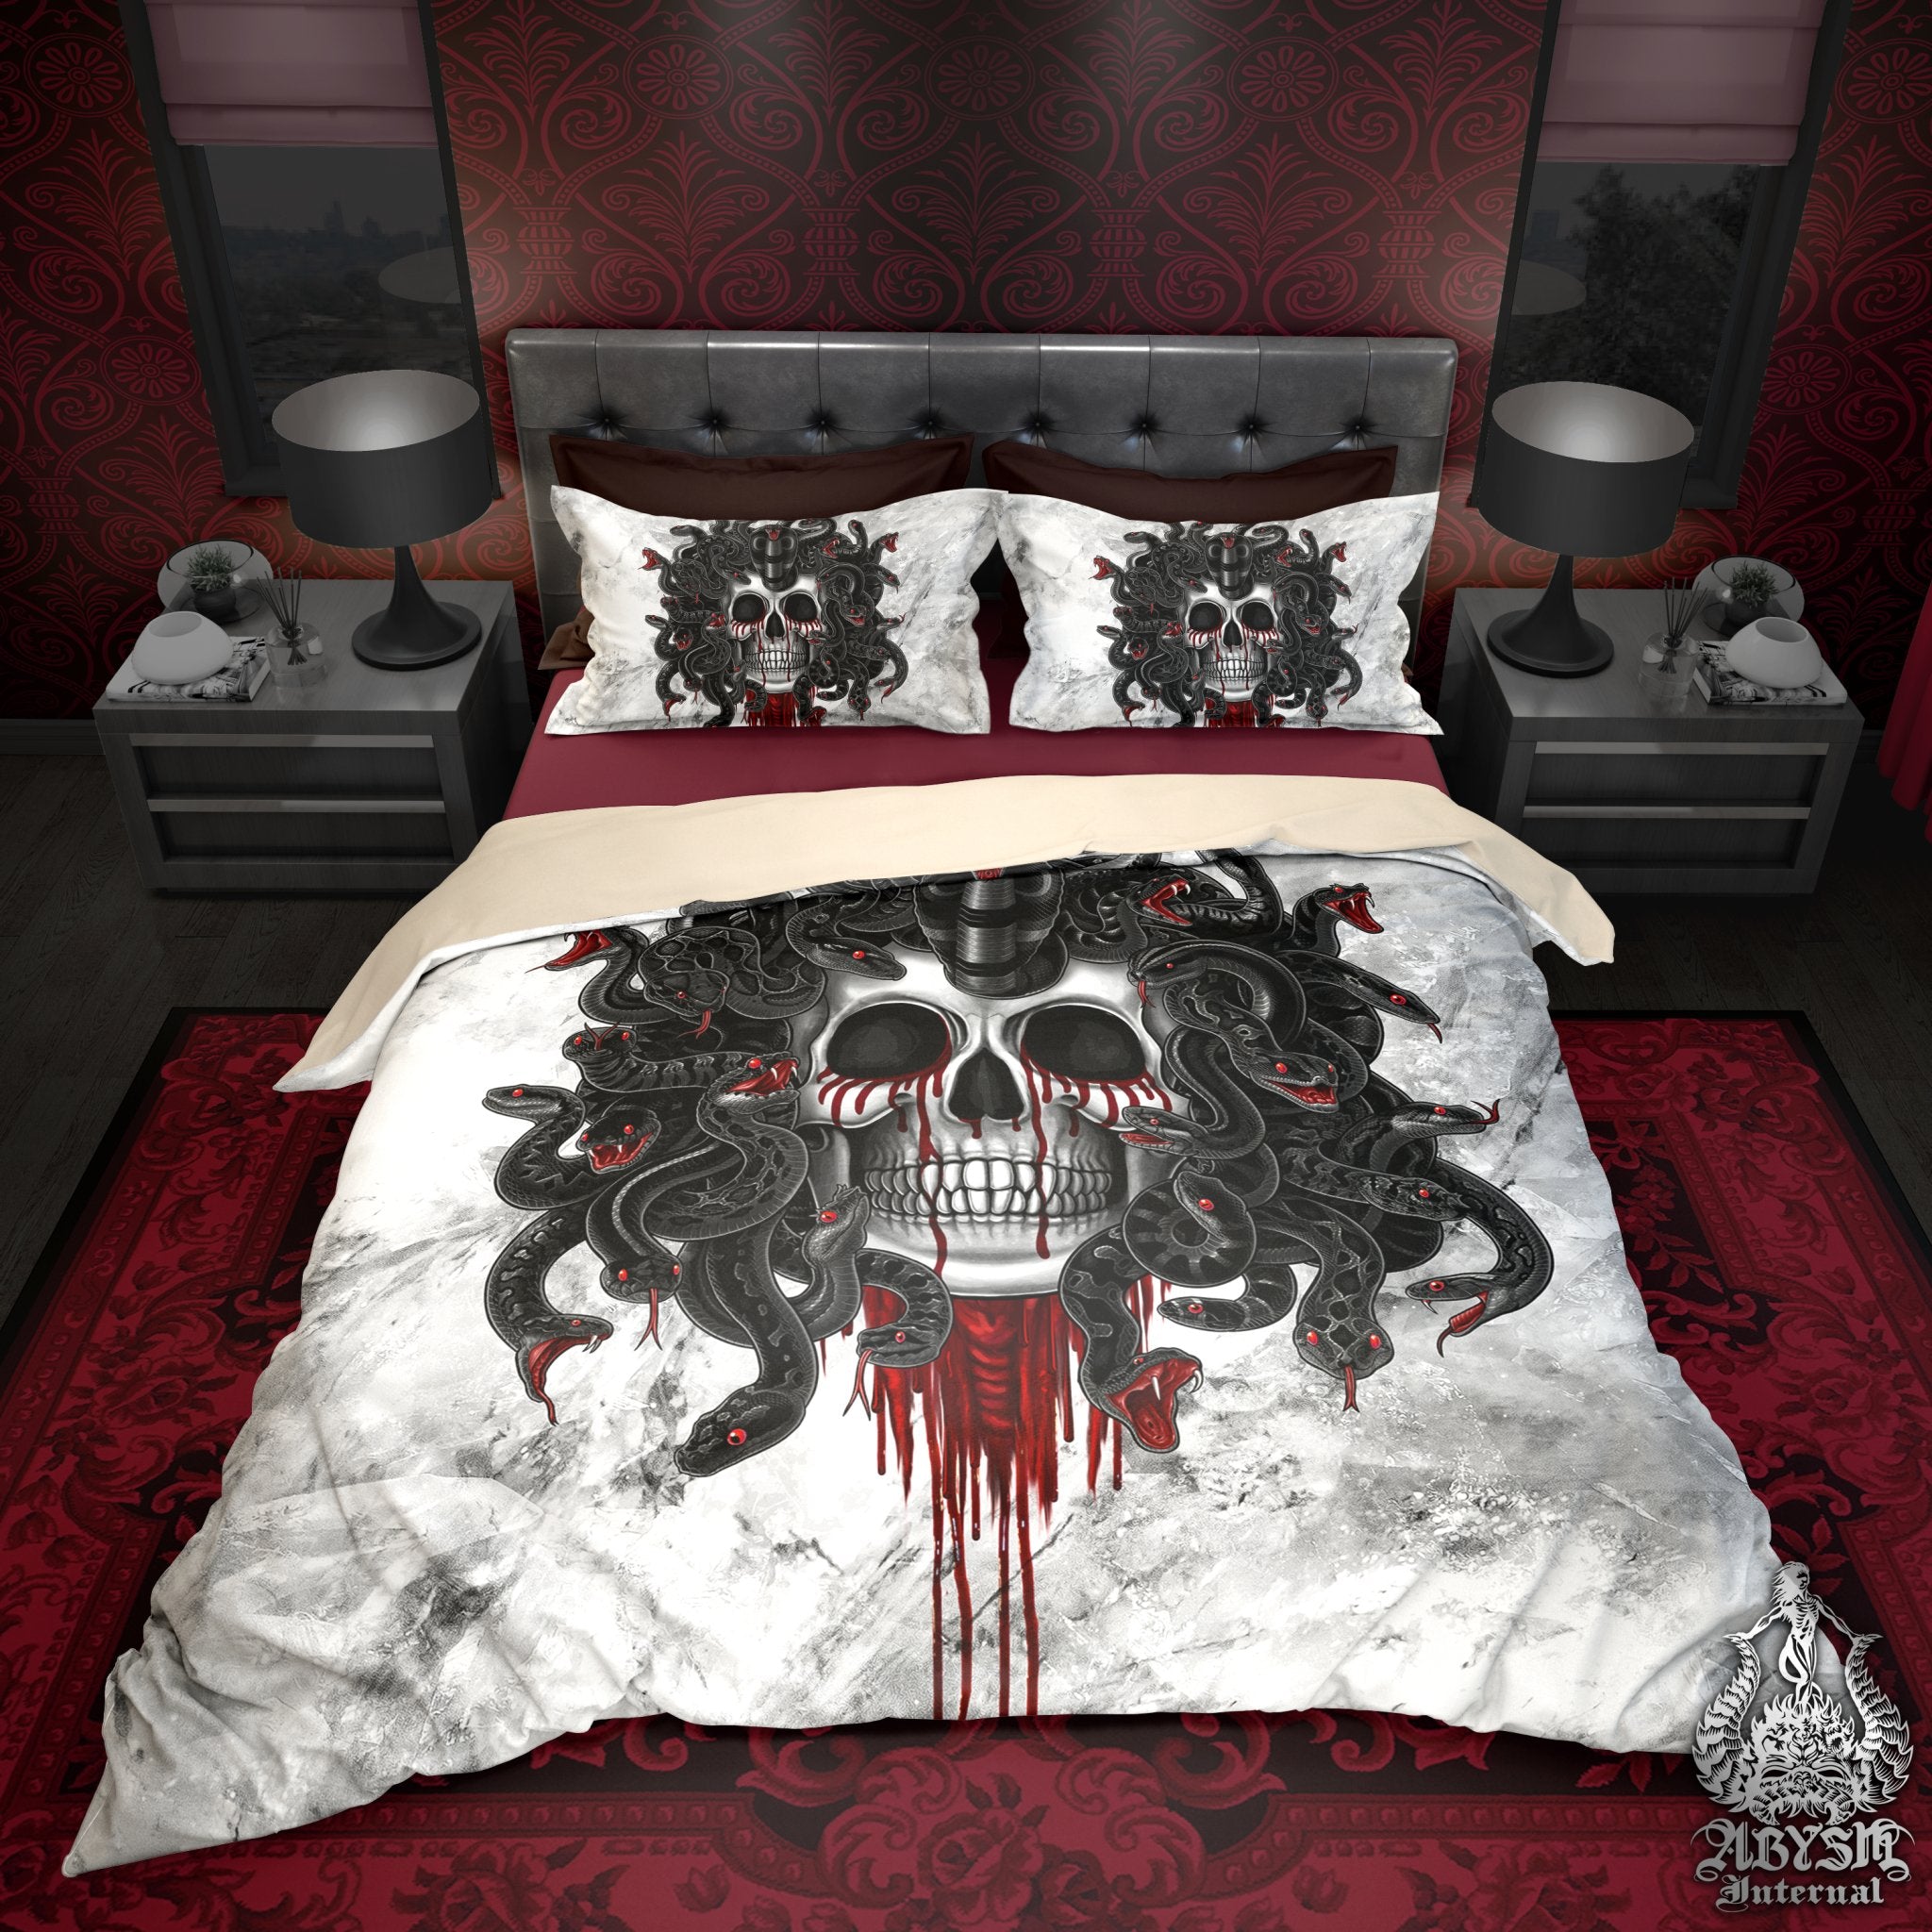 White Goth Bedding Set, Comforter or Duvet, Vampire Medusa, Gothic Bed Cover, Skull Bedroom Decor, King, Queen & Twin Size - 2 Faces, 3 Colors - Abysm Internal